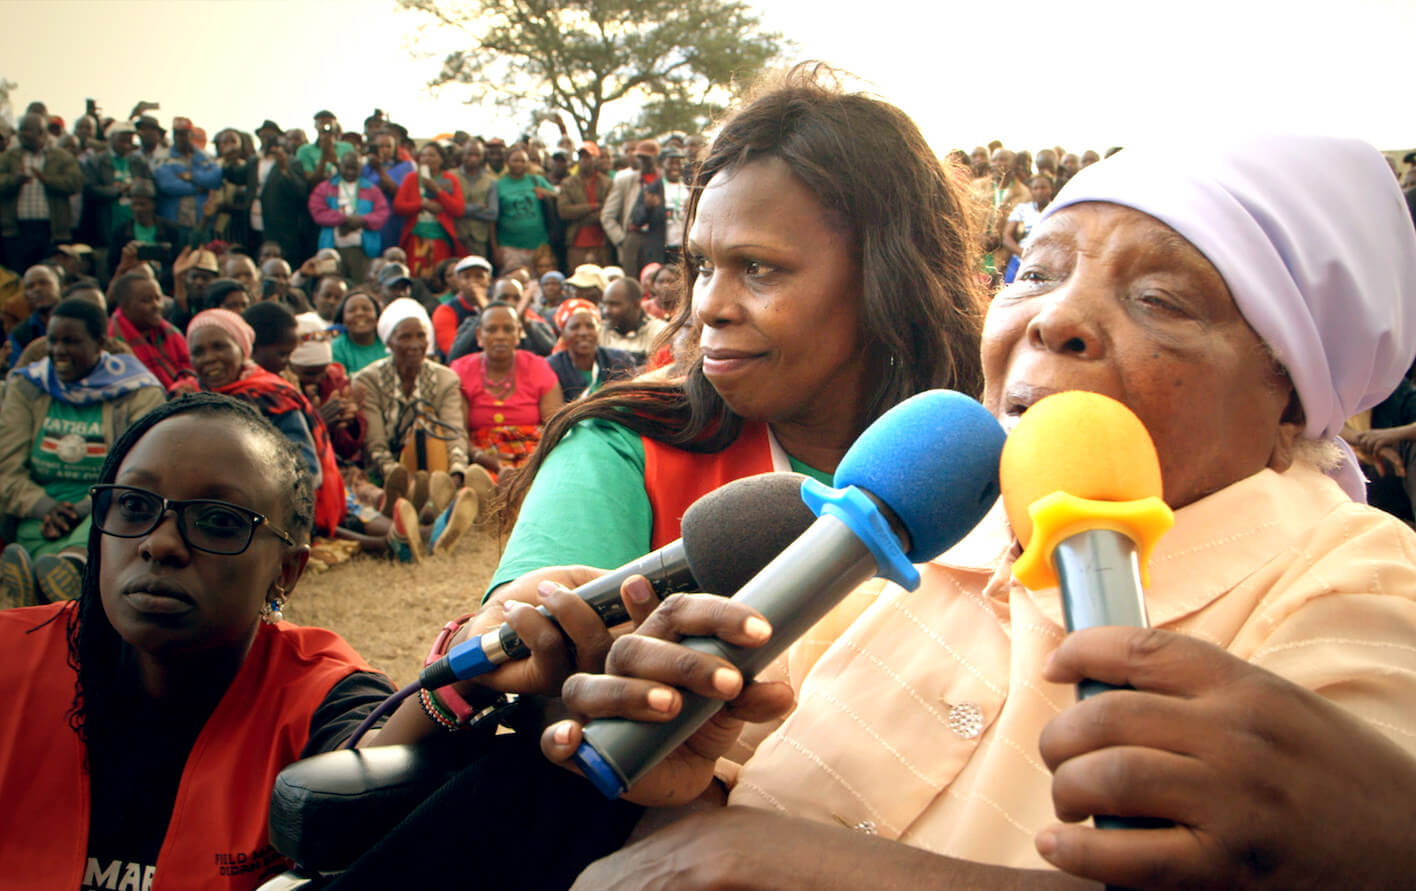 Still from Testament. An older woman speaks into three microphones being held to her mouth. Two other women, stand to the side of her, facing the camera. In the background, many people are sitting in a field looking at the three women.